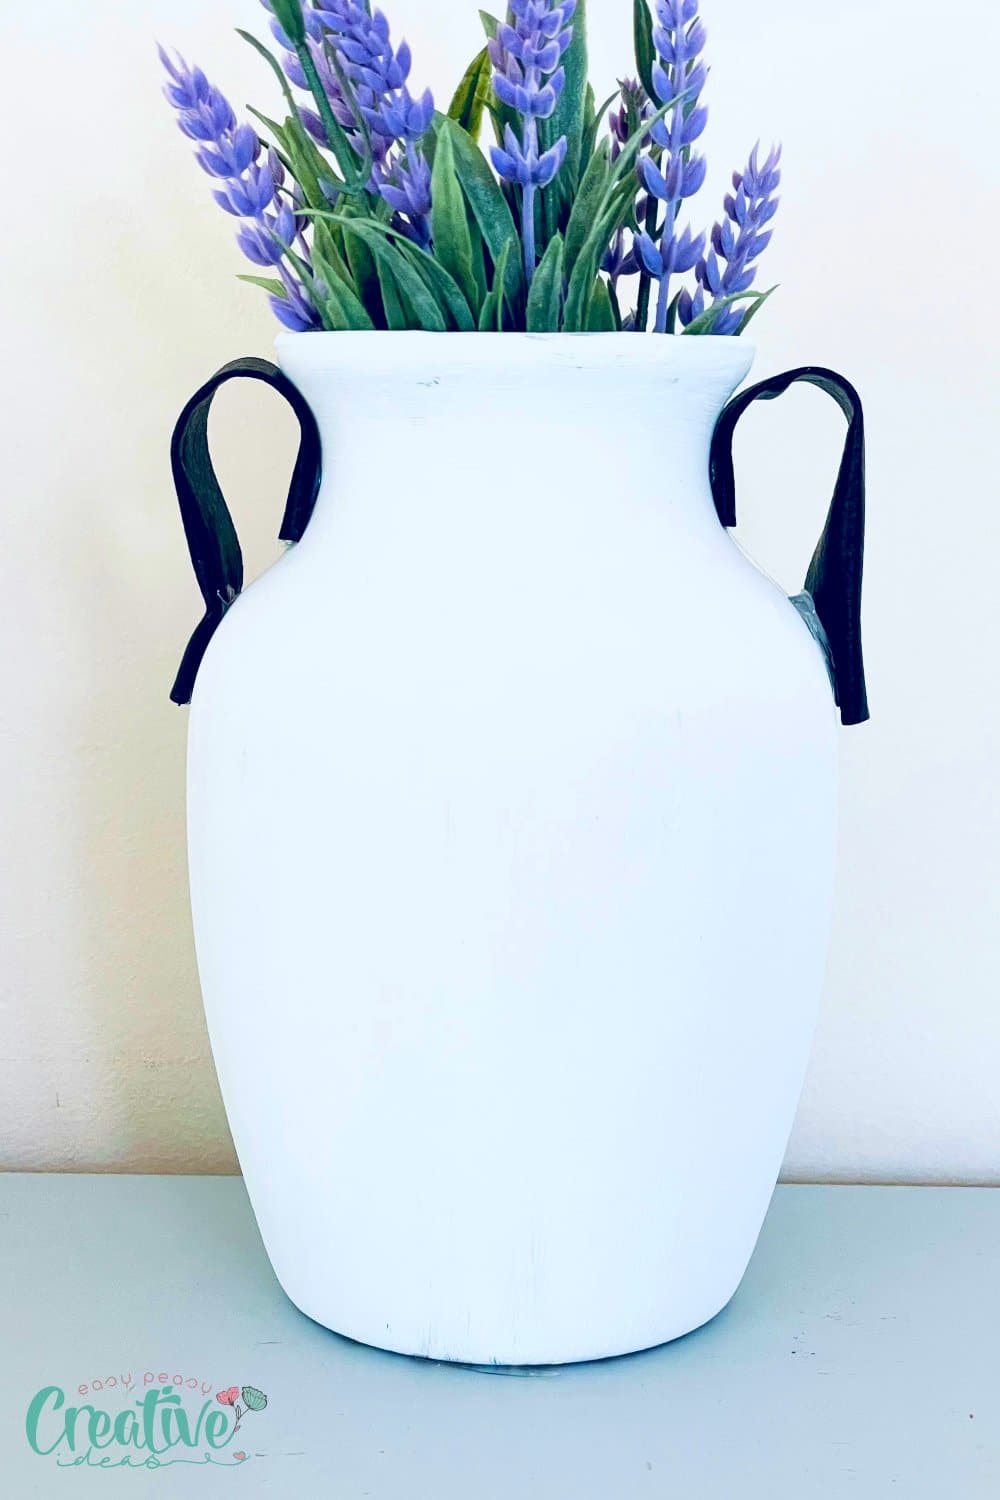 Front image of a DIY vase illustrating how to make a vase inspired by the Pottery Barn dupe vase